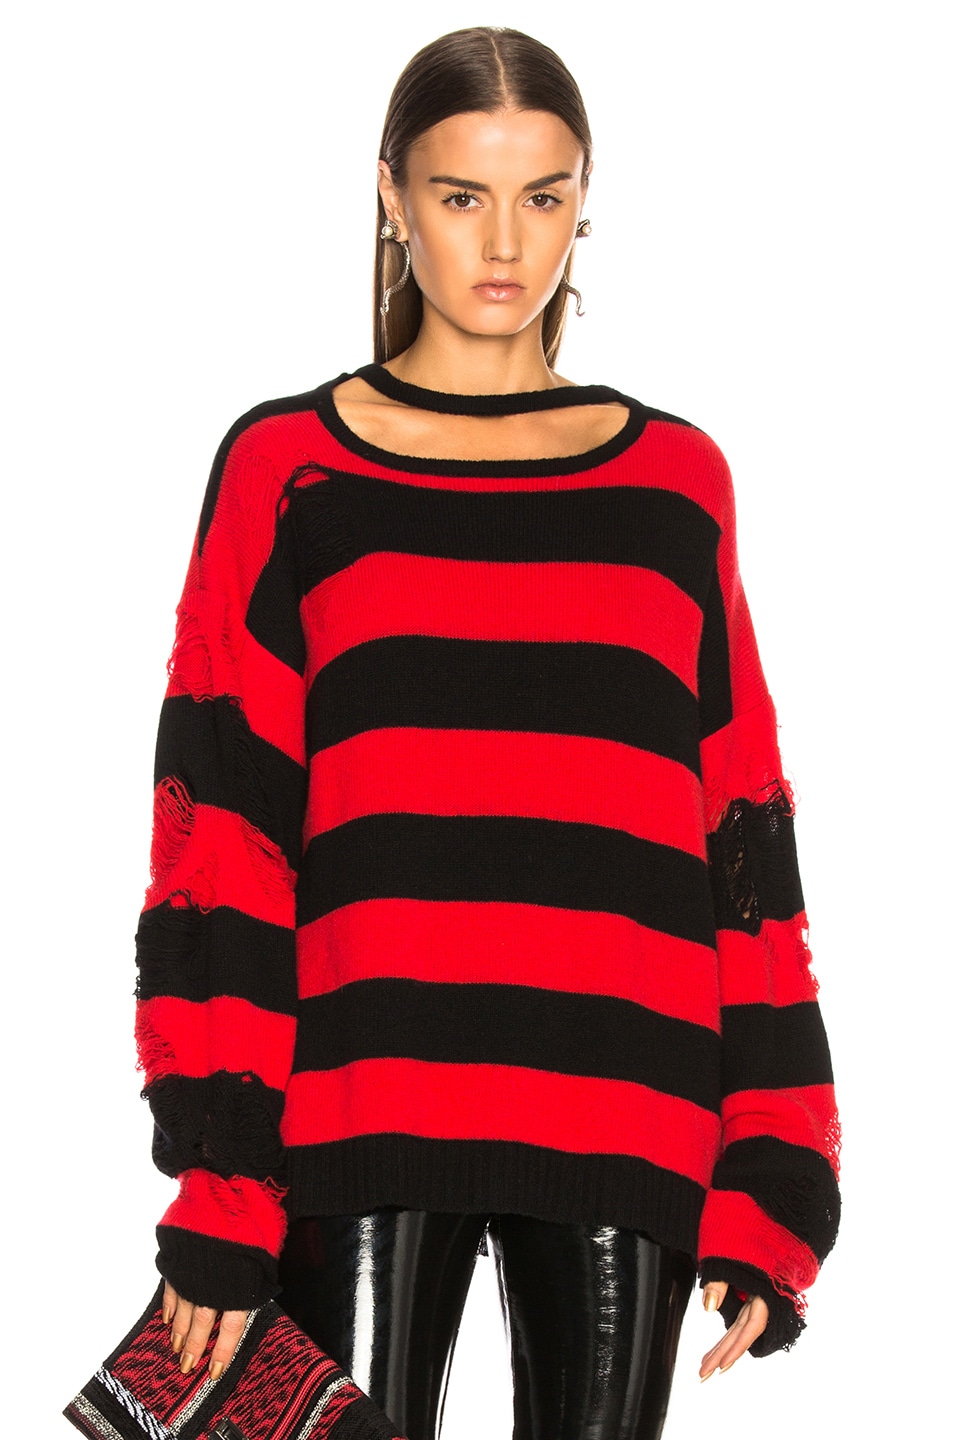 Image 1 of TRE by Natalie Ratabesi Love Sweater in Ruby Navy Stripe